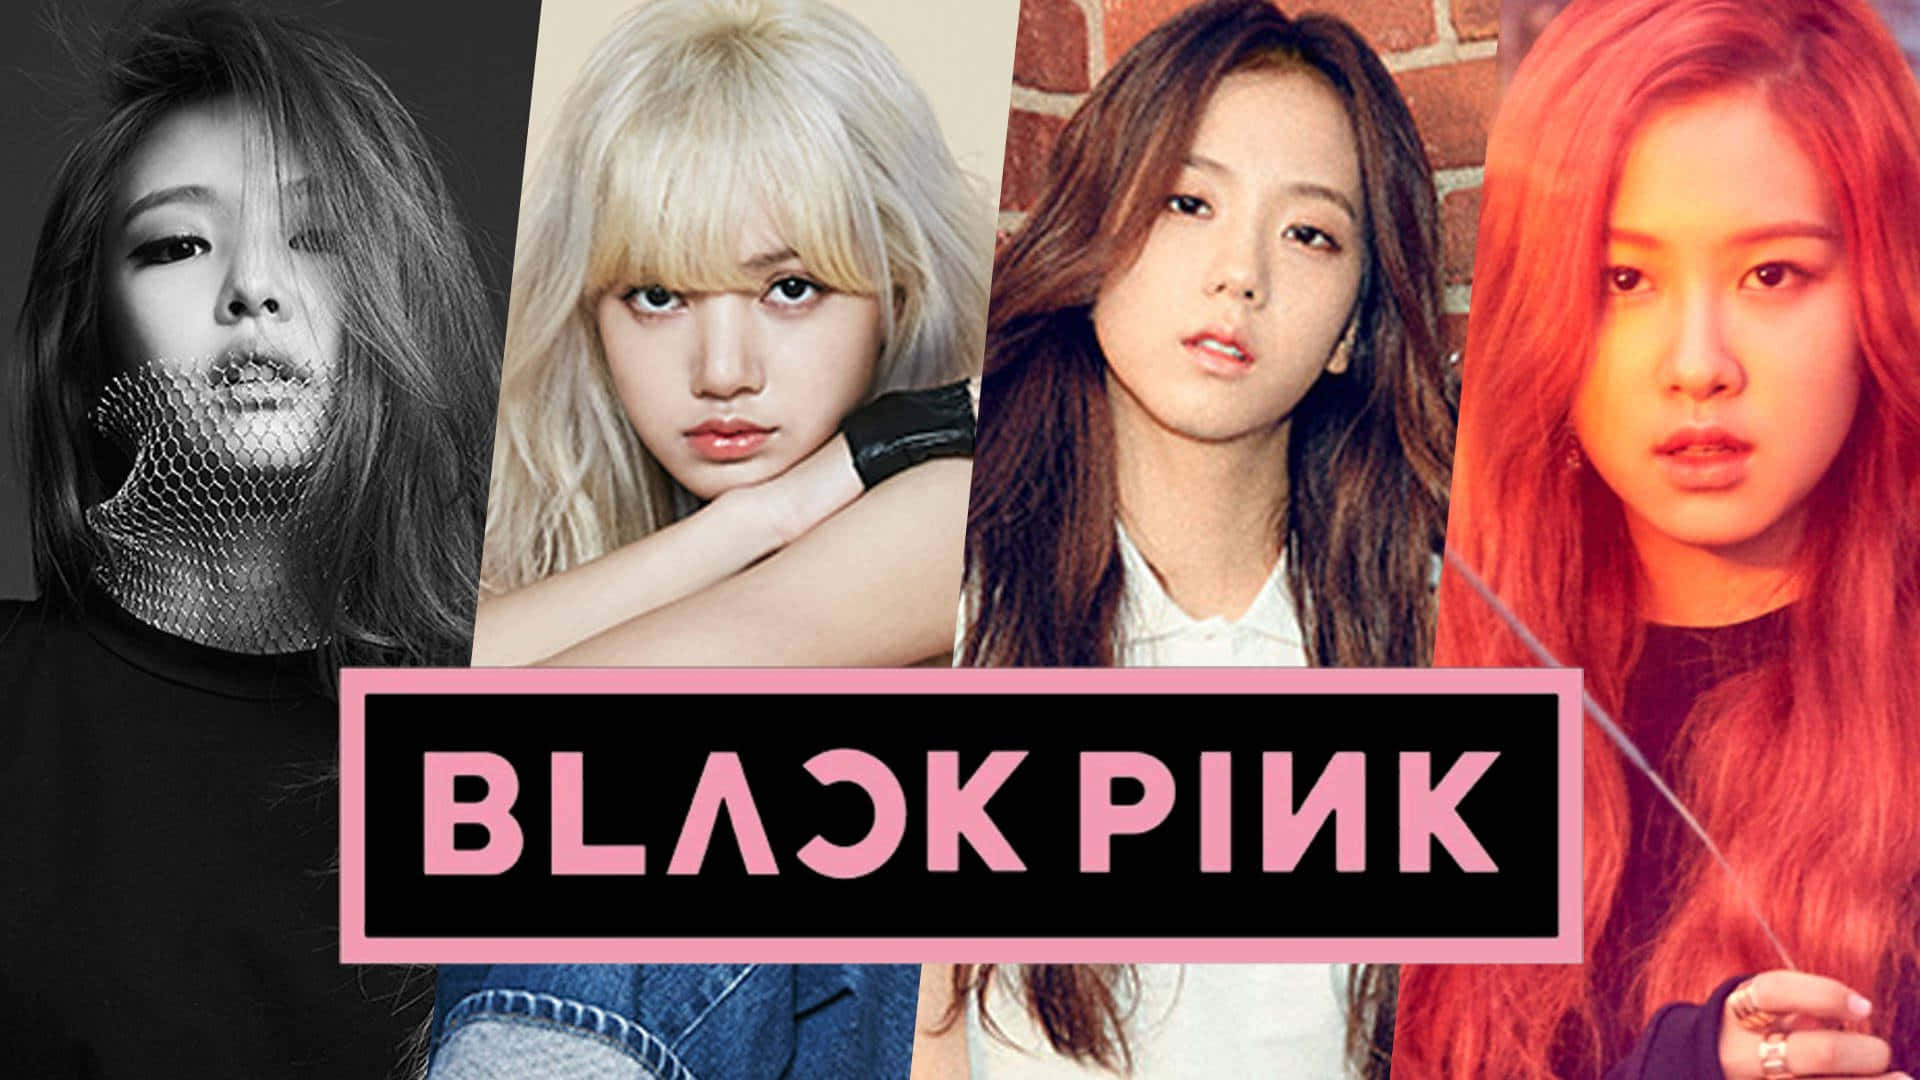 K-pop girl group Blackpink makes a powerful statement with their charismatic style